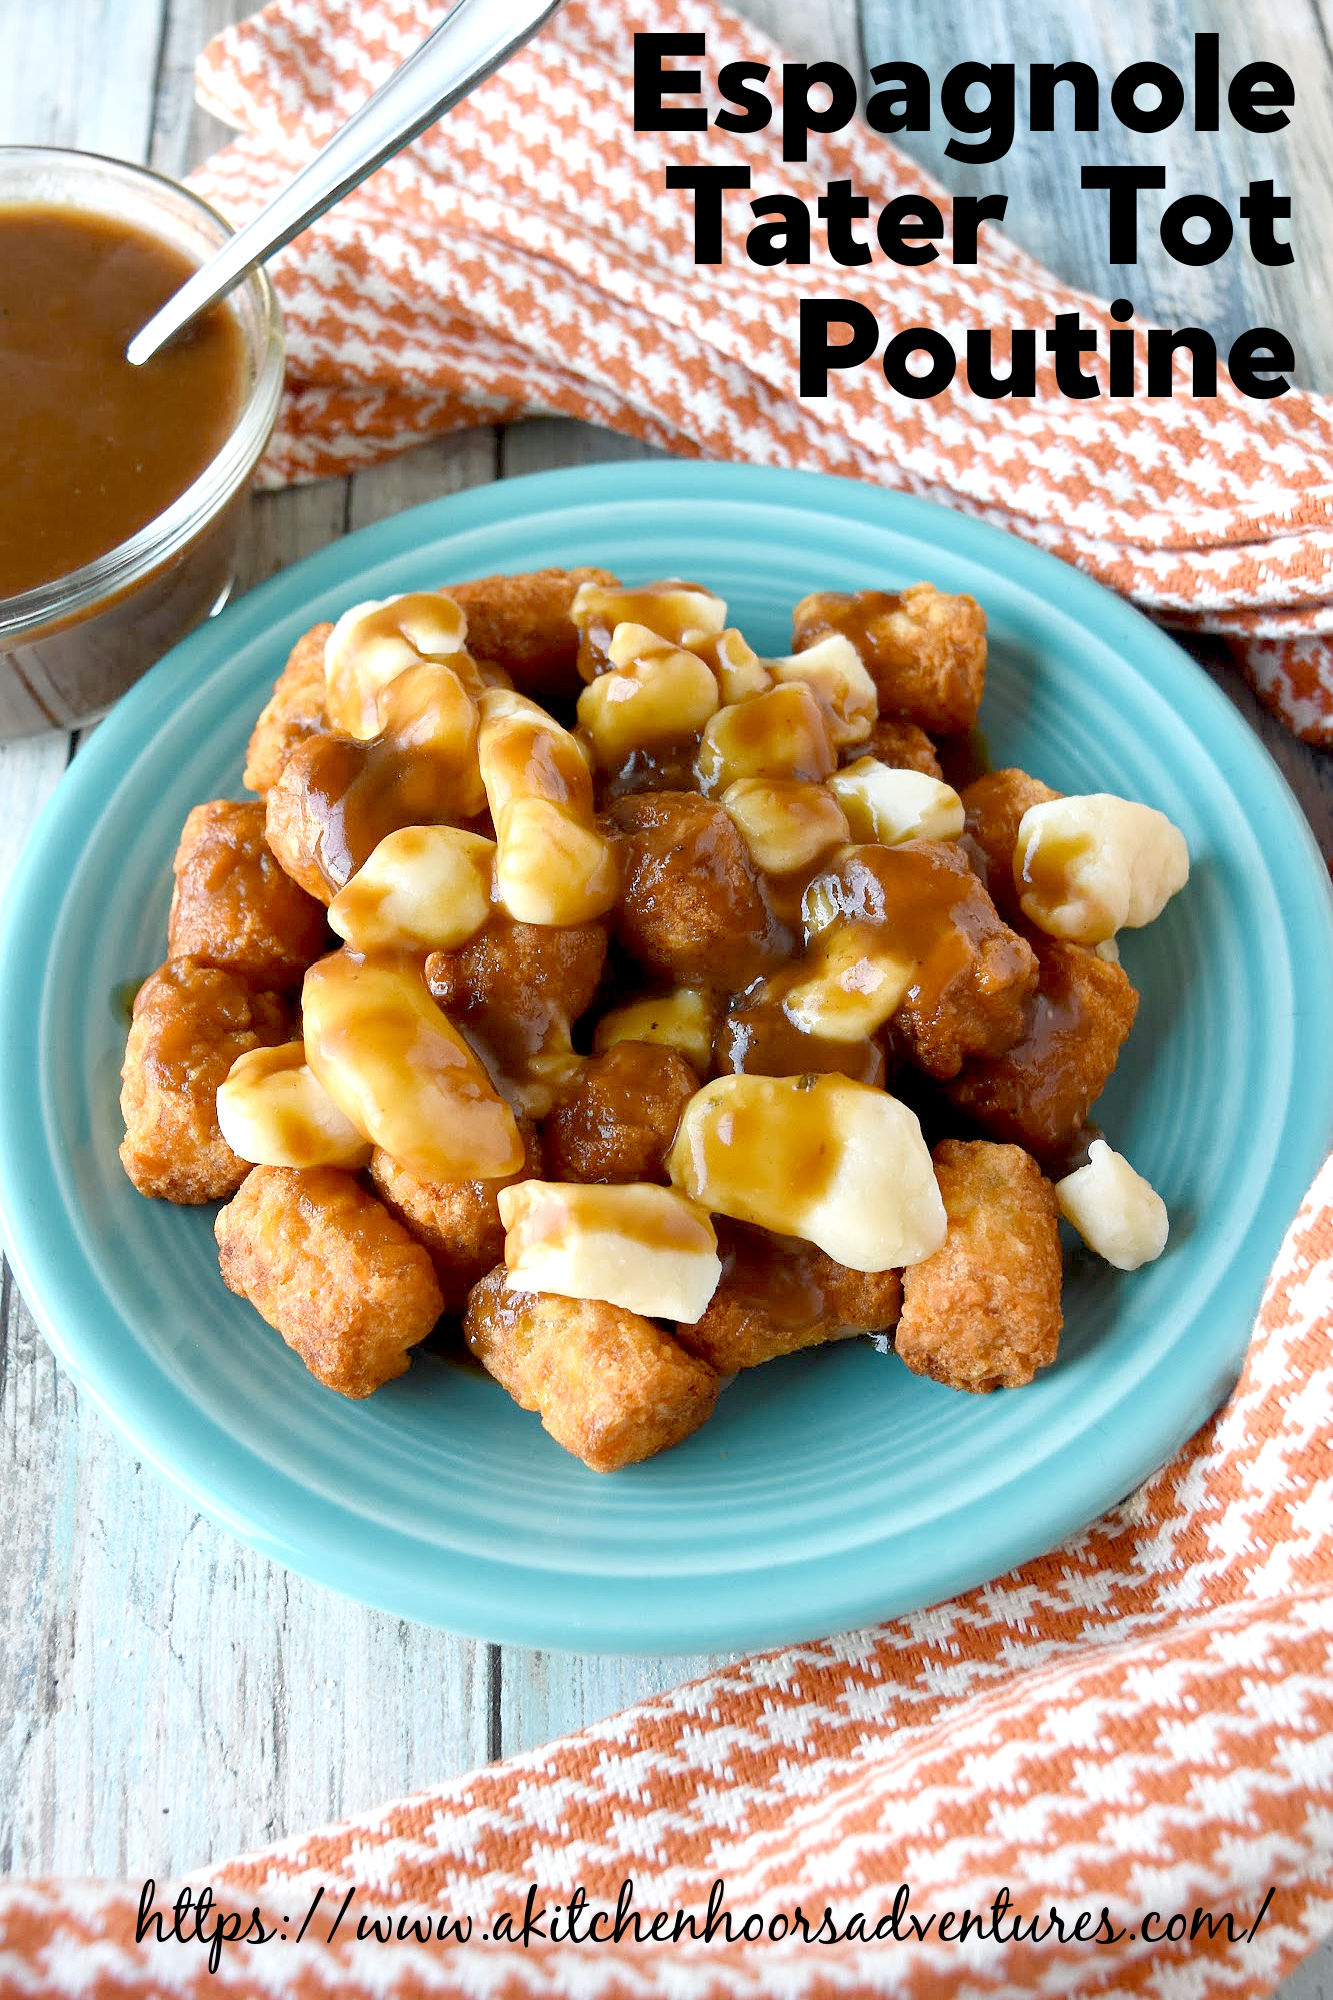 Espagnole Tater Tot Poutine has delicious Espagnole sauce poured over crispy tater tots and delicious cheddar cheese curds.  Espagnole takes a little bit of effort, but it's well worth it! #OurFamilyTable